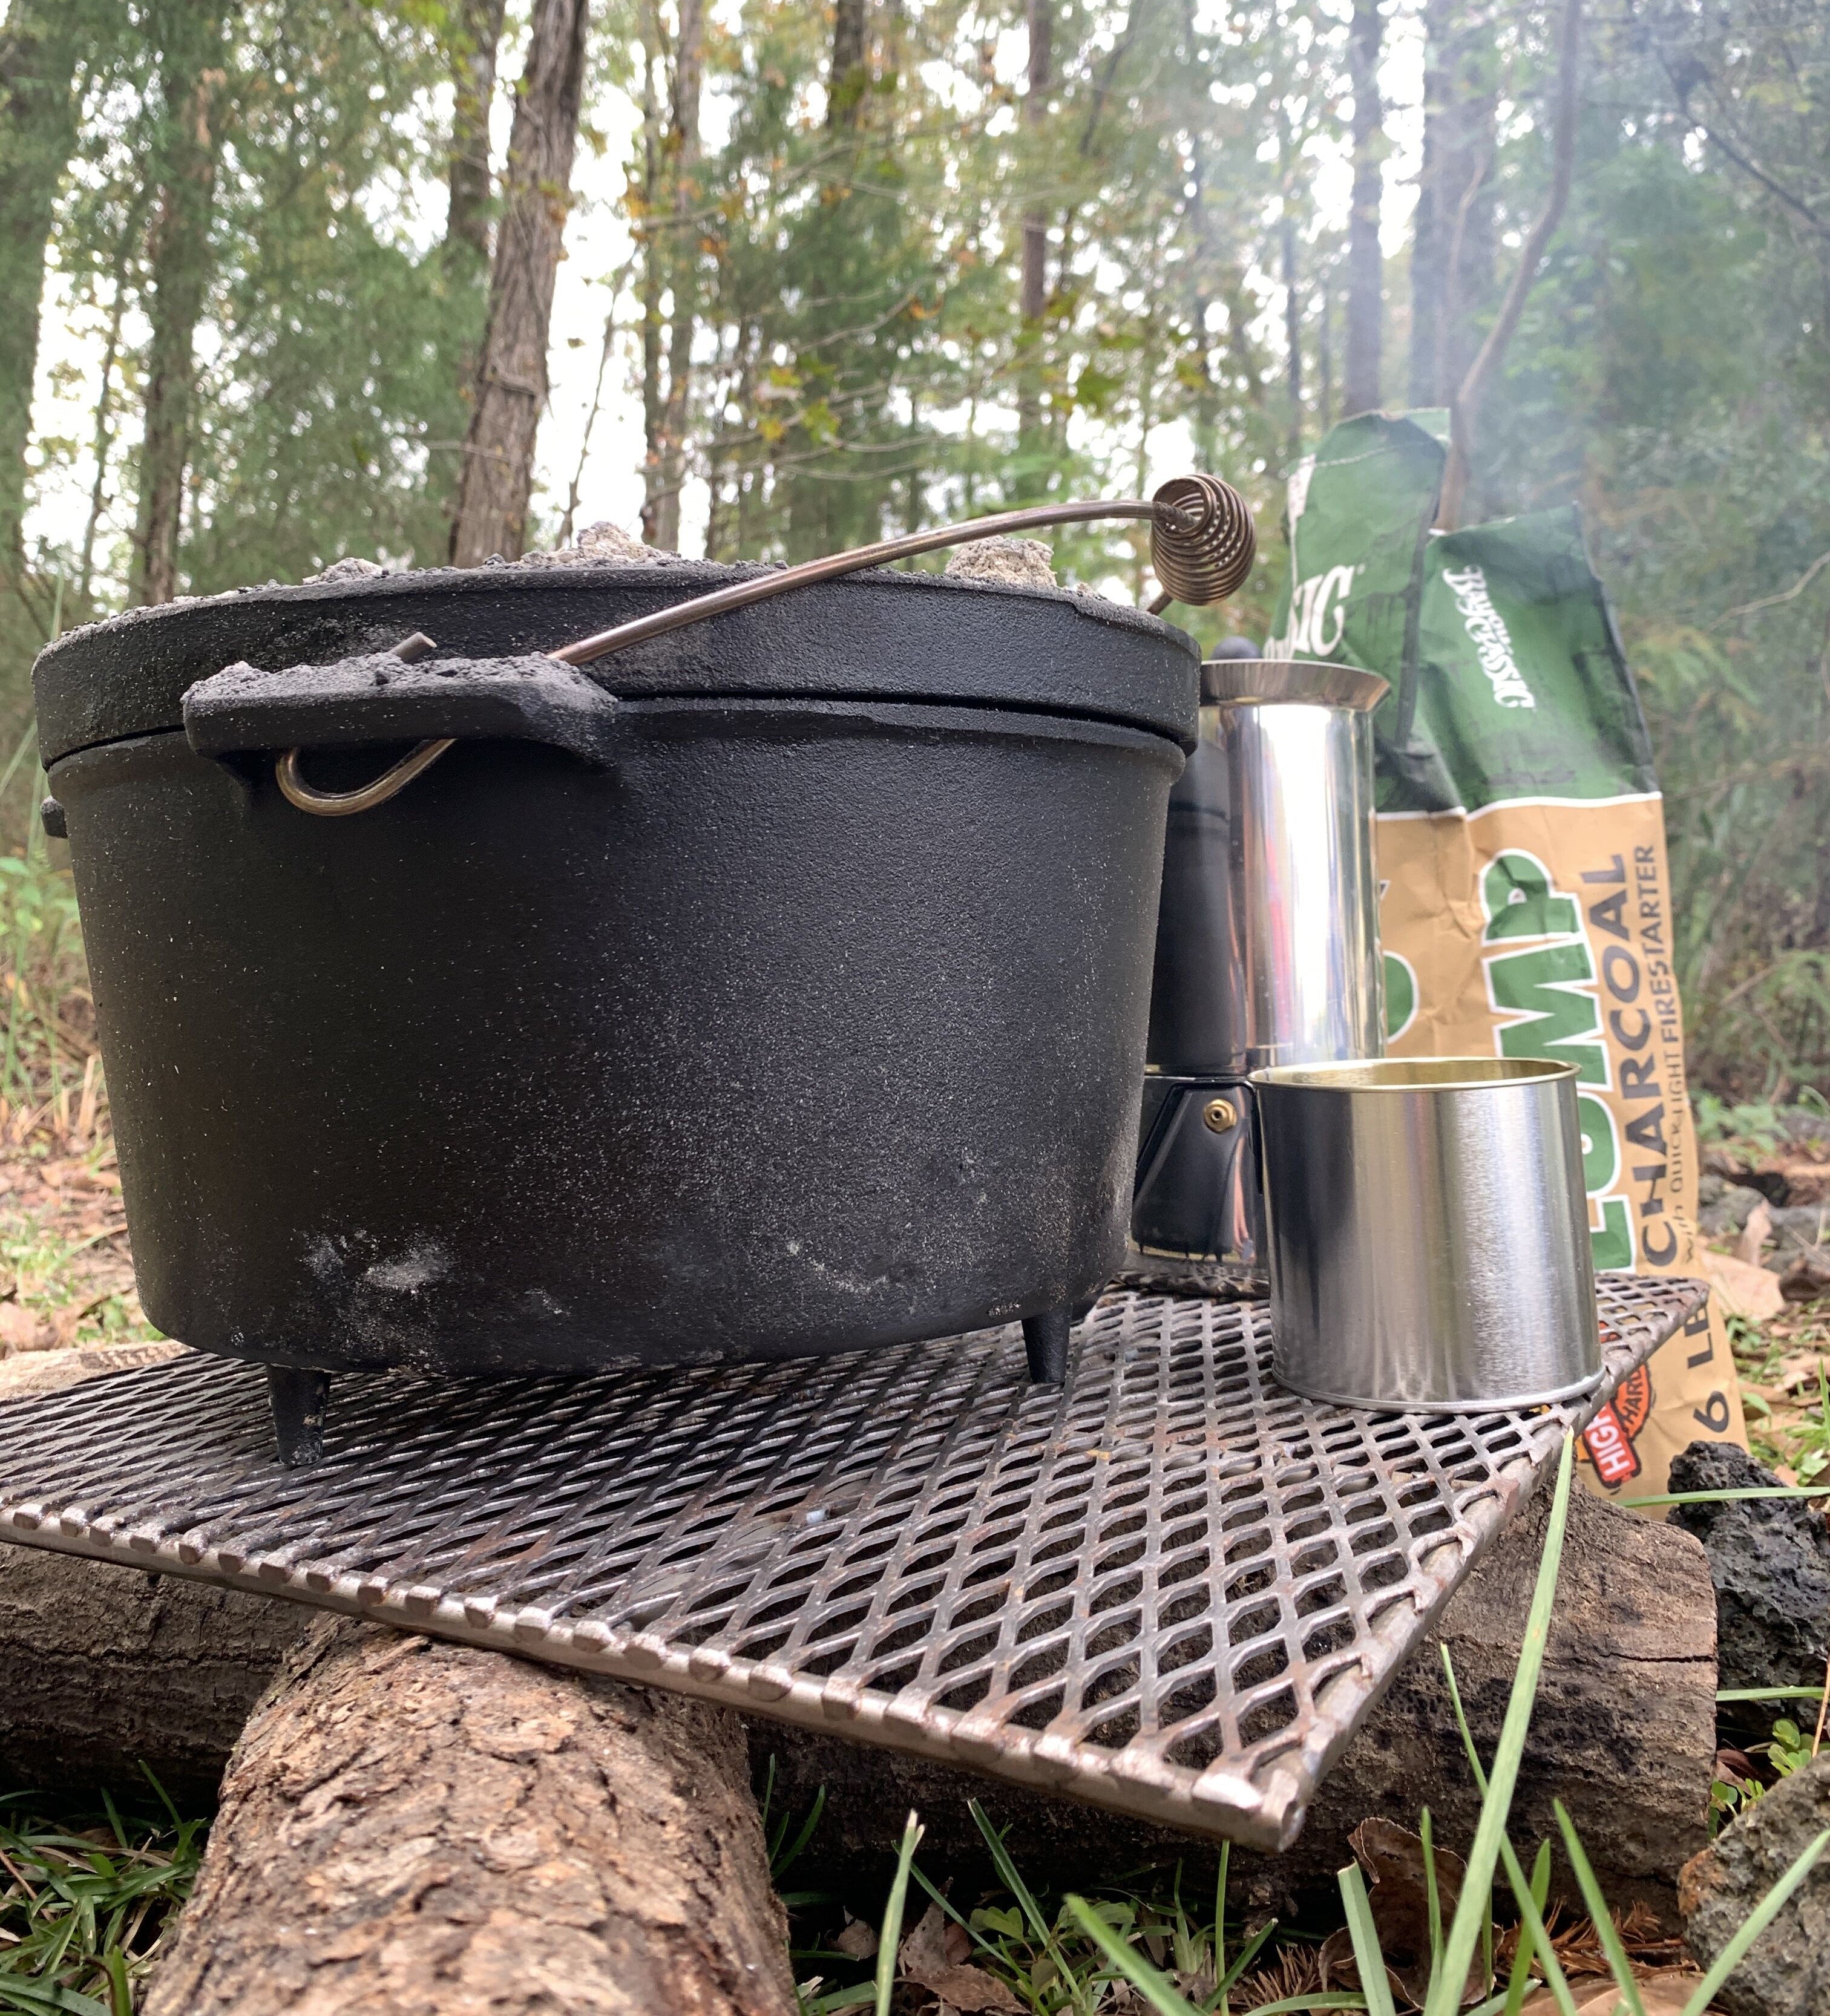 Dutch oven lid lifter for campfire cooking 